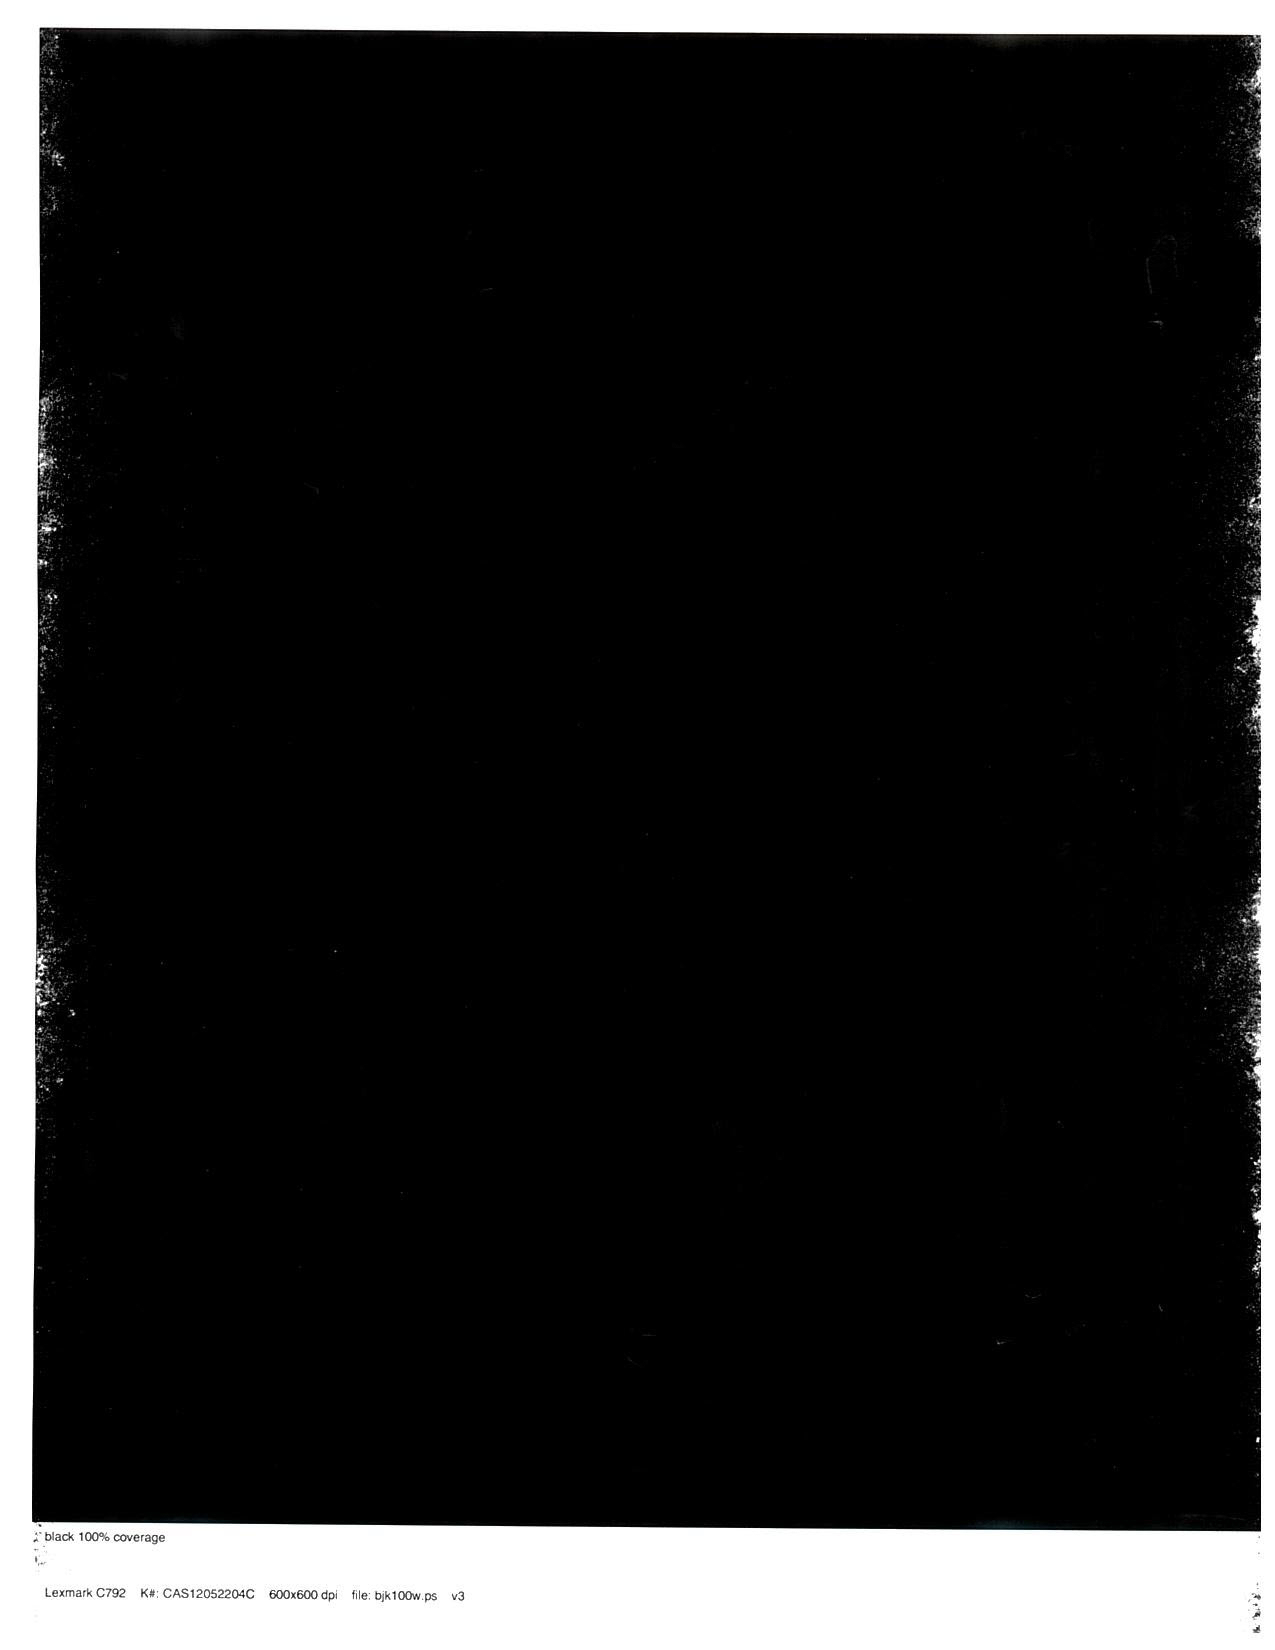 White void (cold offset) on a solid black at the edge of the page